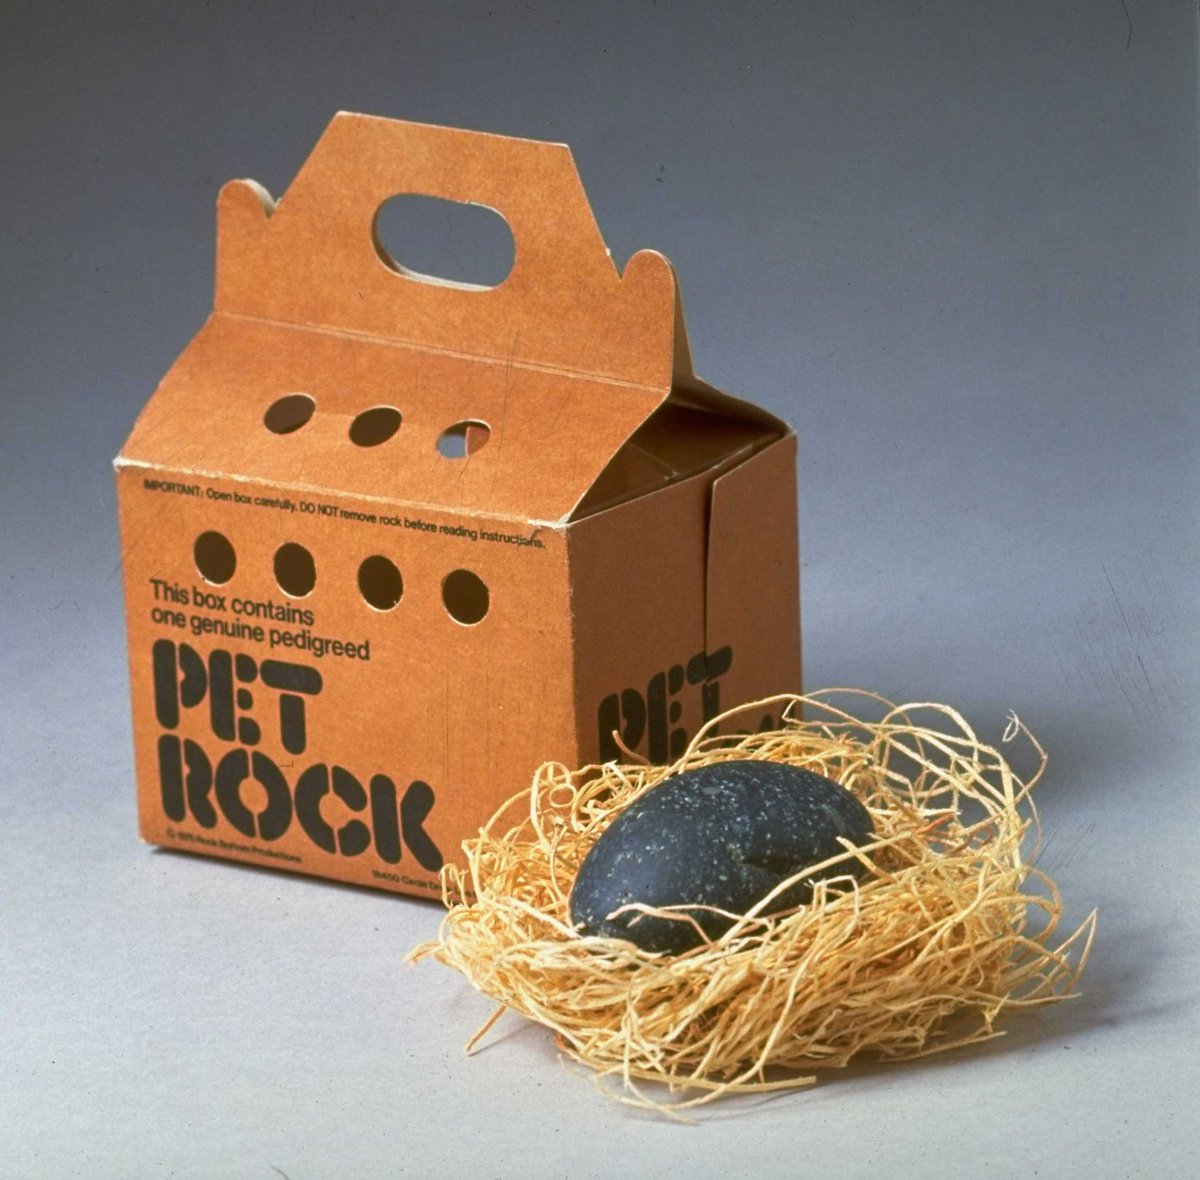 In 1975 a guy invented pet rocks, they became a fad, and he sold over a million of them.

It was a rock. In a box. On straw. With, apparently, a funny manual.

$4 at the time. $23 today.

FOR A ROCK YOU COULD GET FOR FREE.

#PetRocks